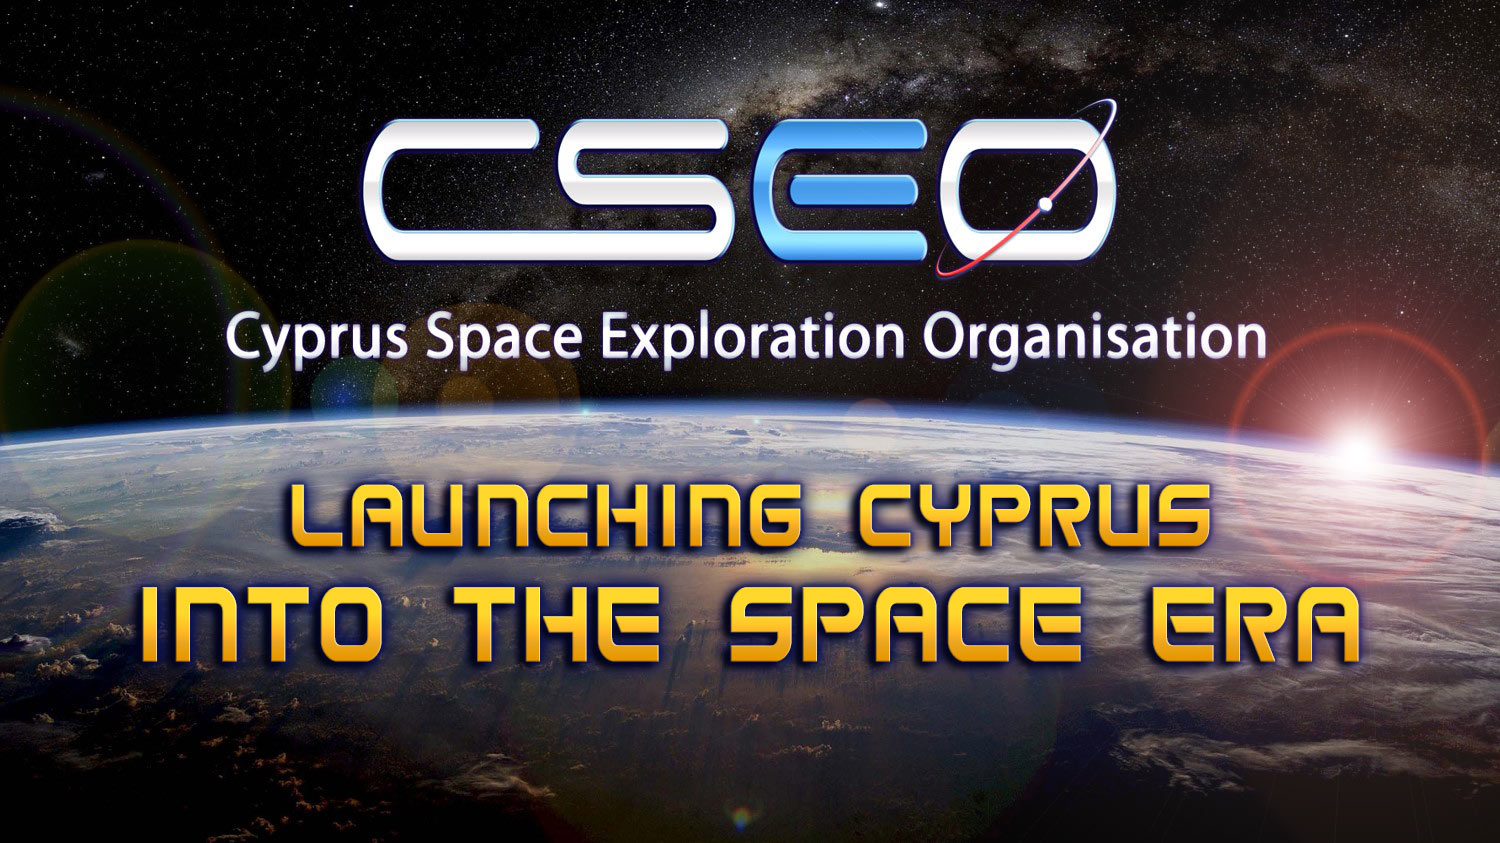 The Cyprus Space Exploration Organisation